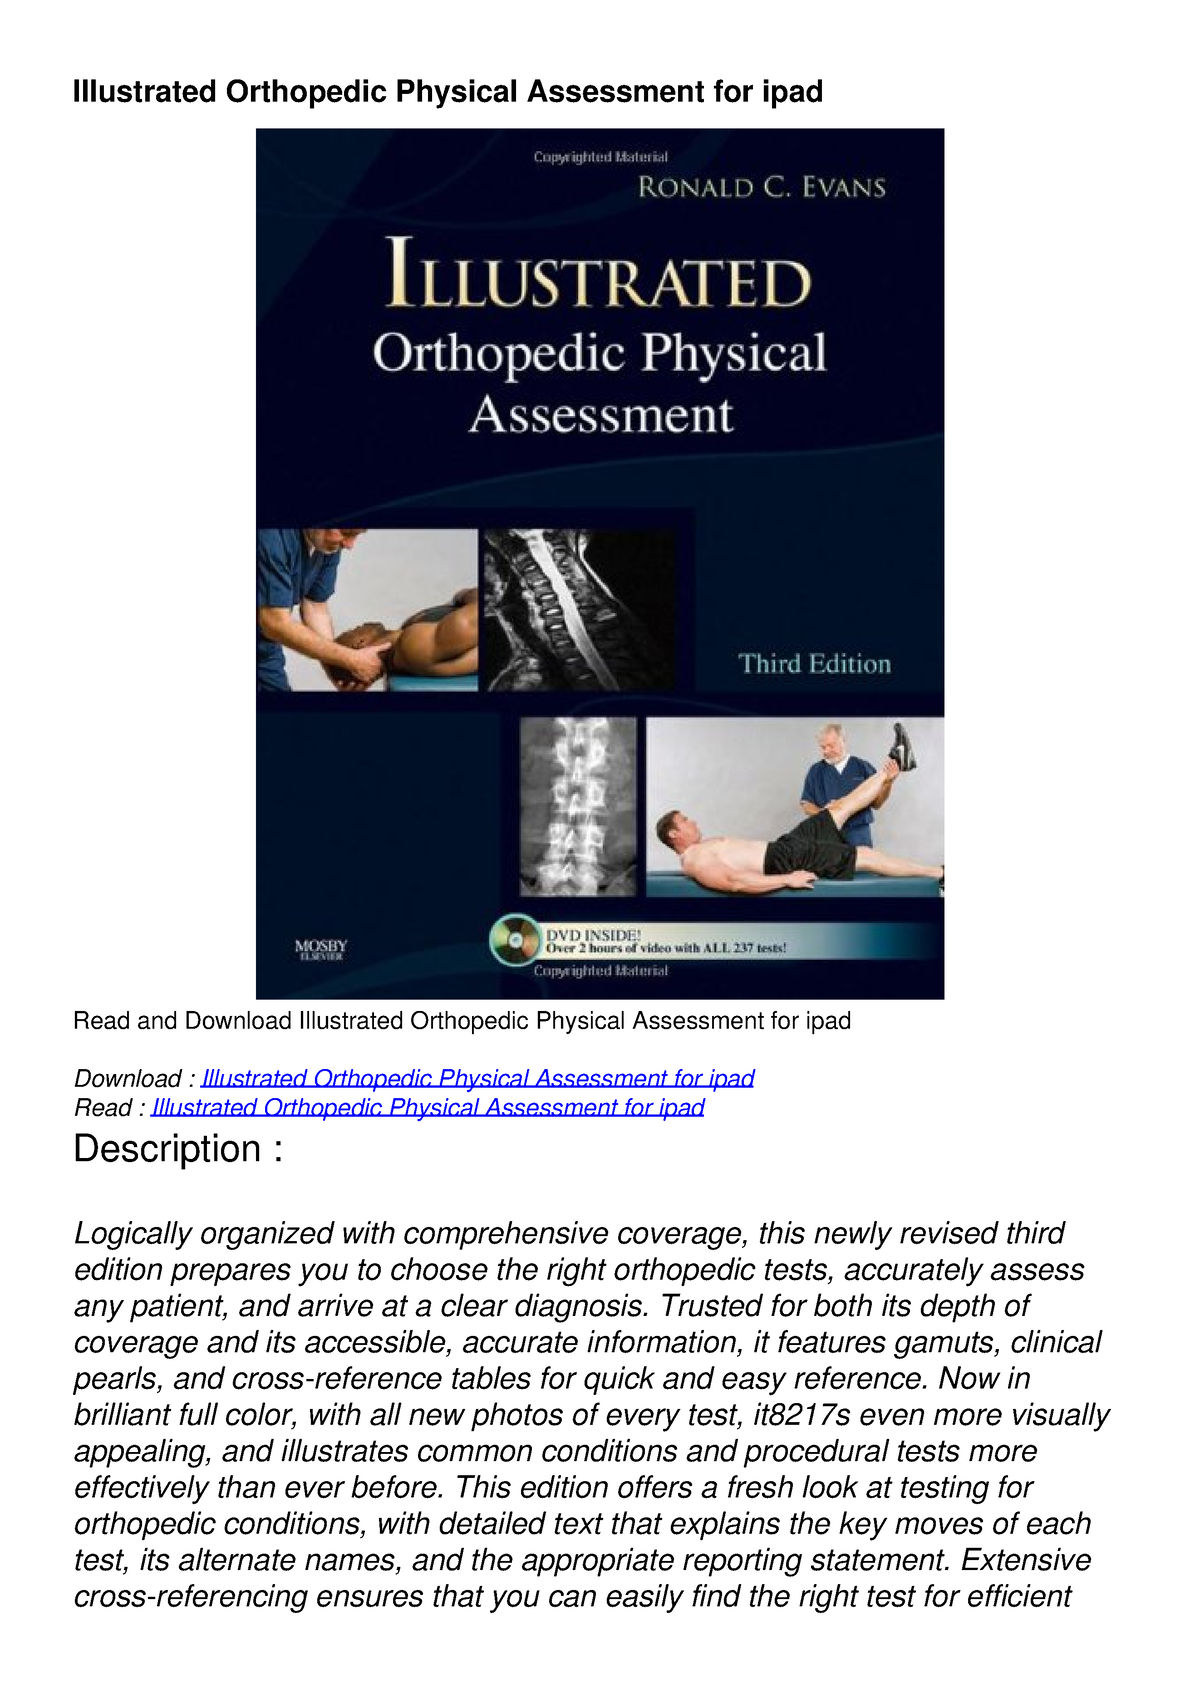 illustrated orthopedic physical assessment free download